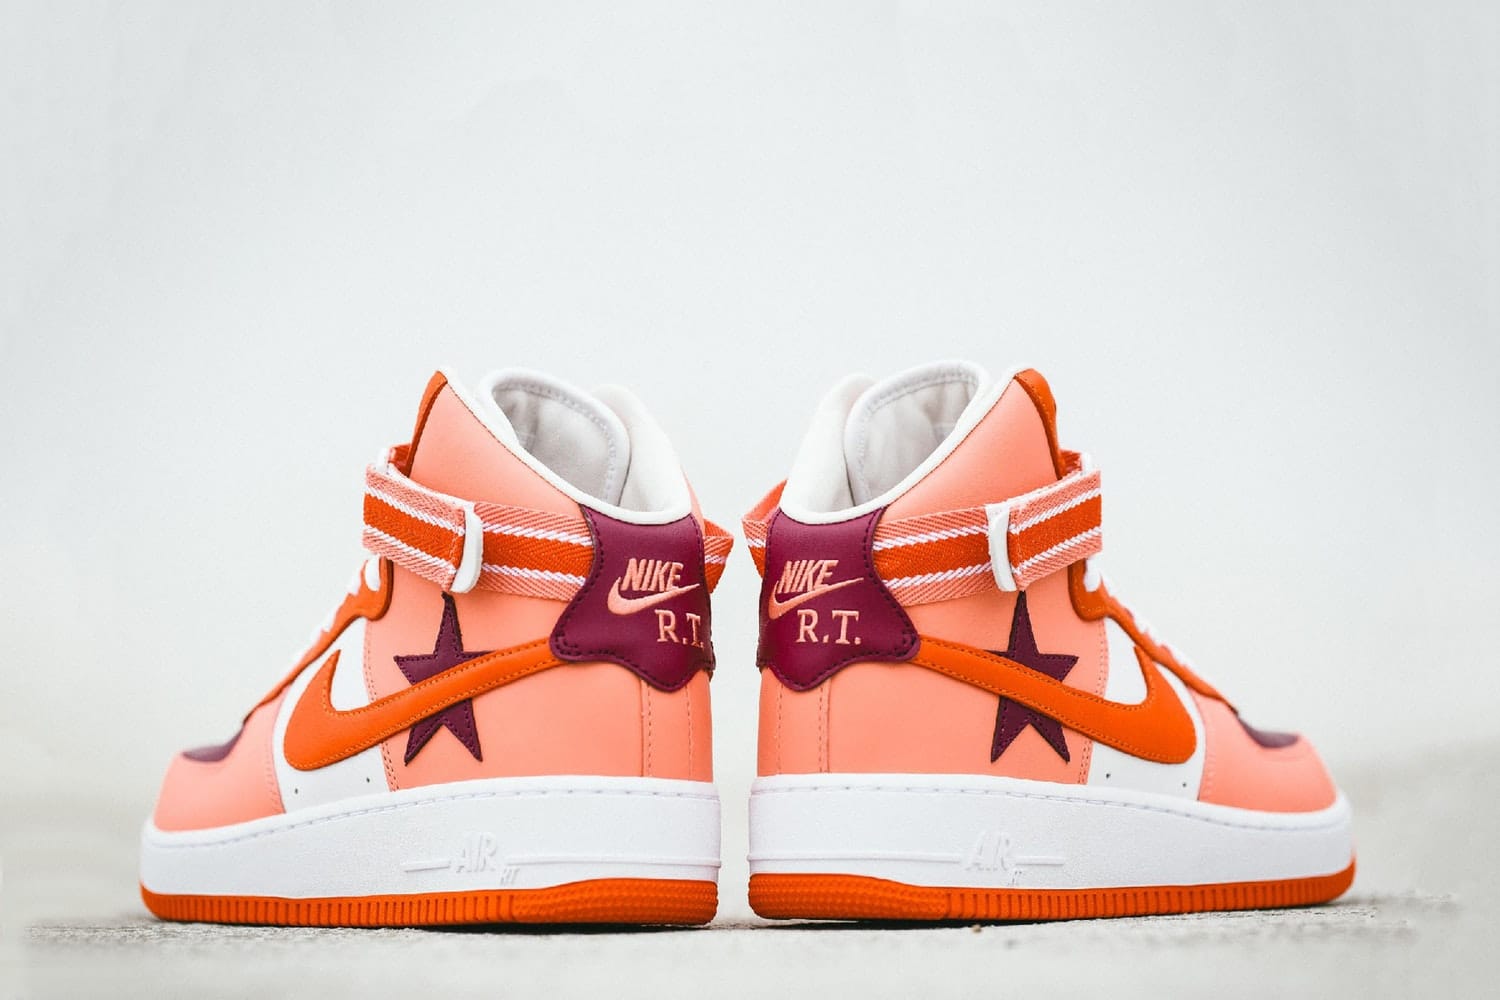 Twisted Uitsluiting Graf Riccardo Tisci x Nike Air Force 1 High Pt.2 | MANNENSTYLE